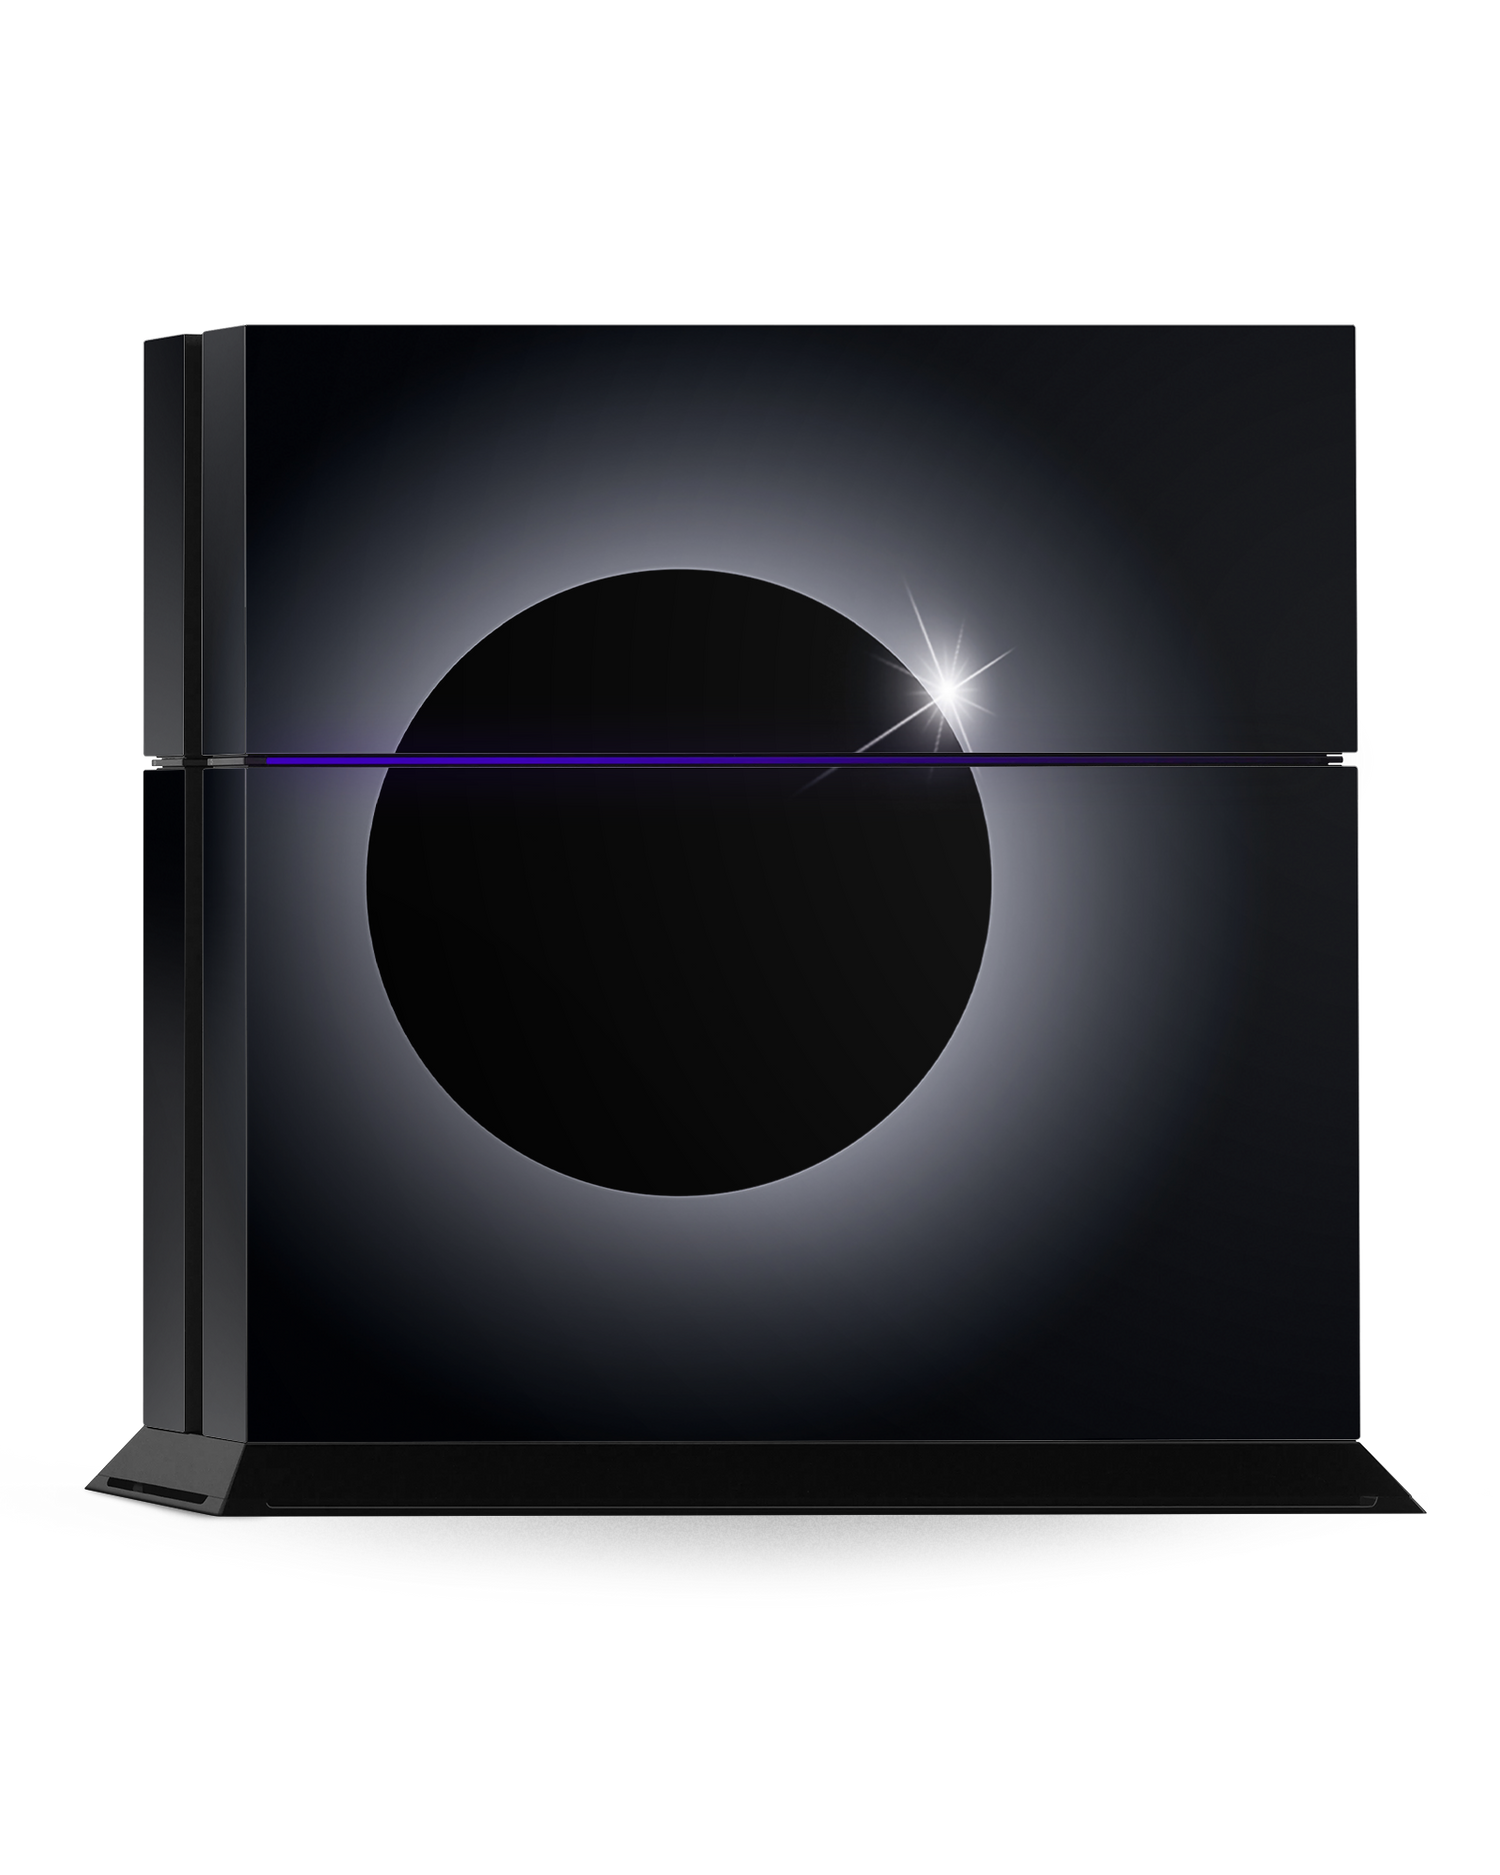 Eclipse Console Skin for Sony PlayStation 4: Standing